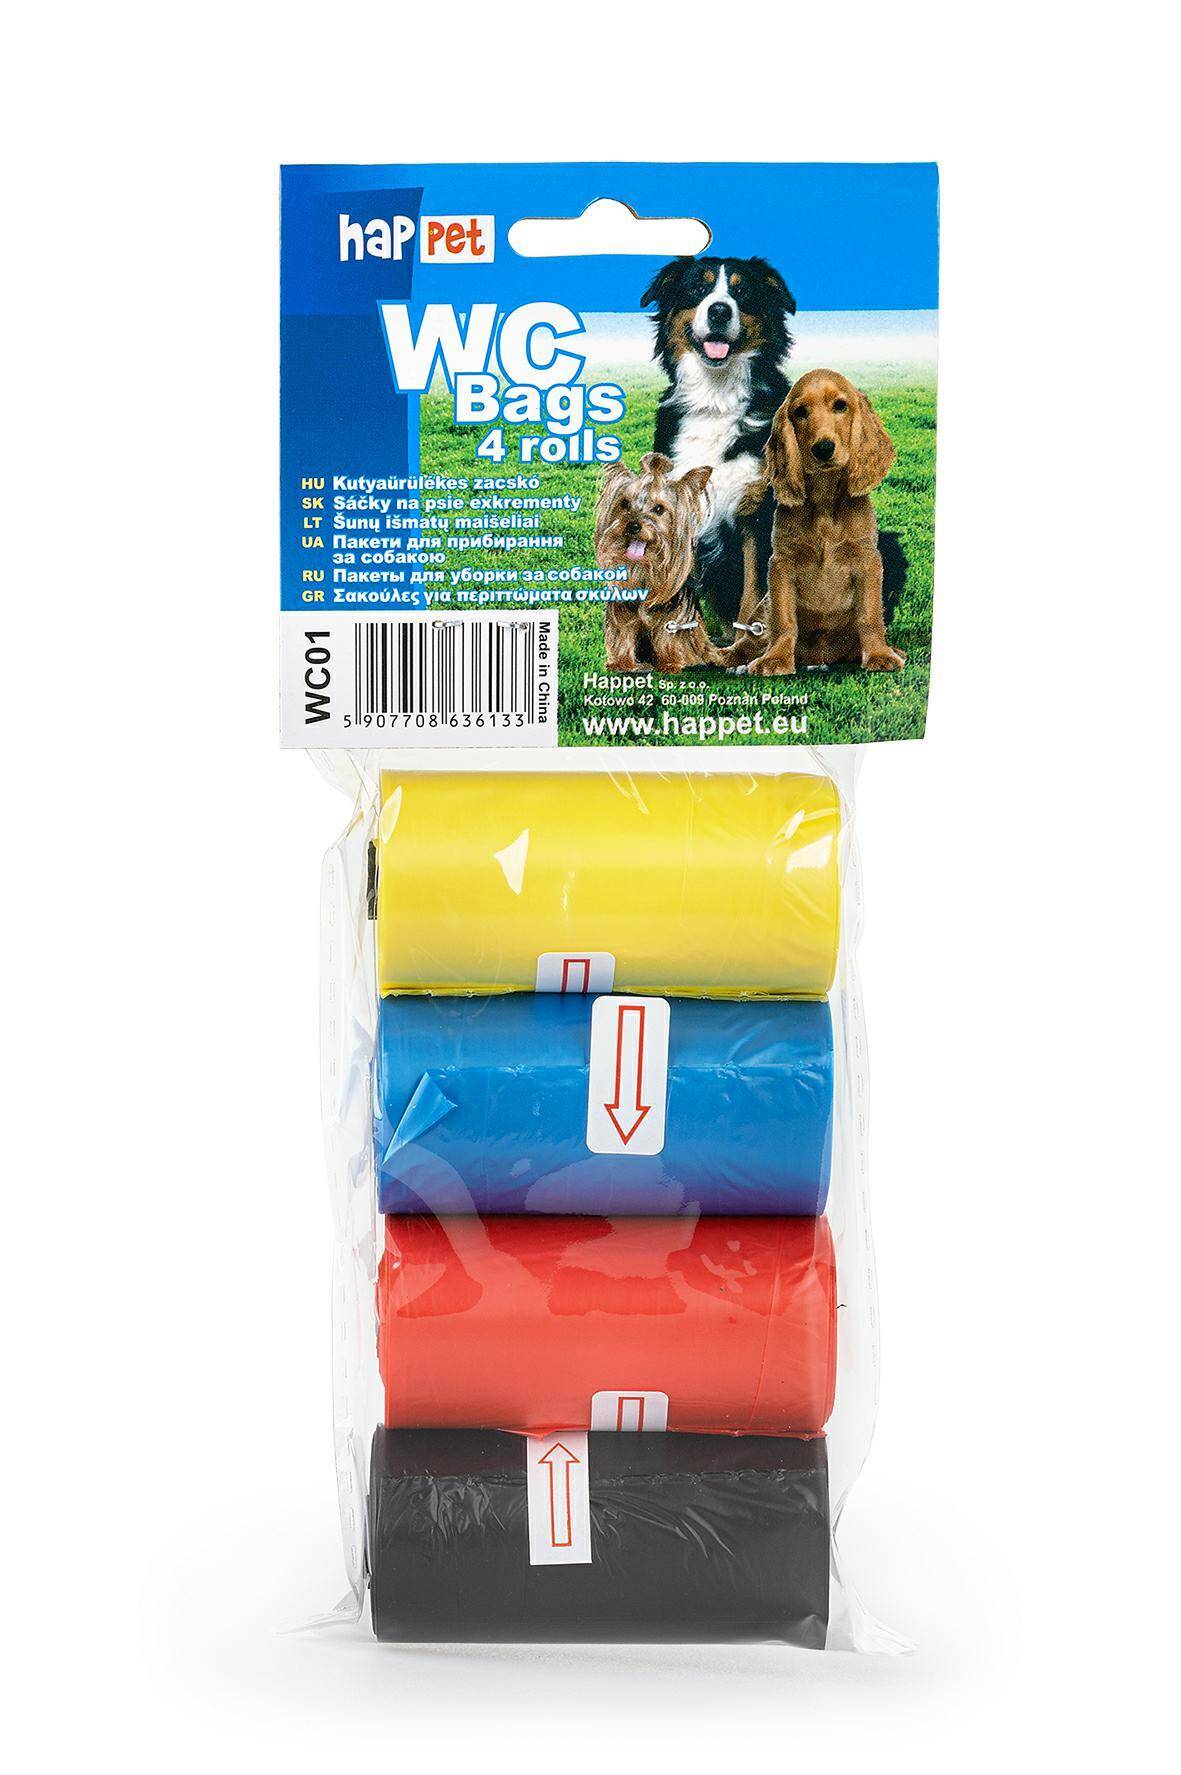 WC01 dog waste bags 4 roll mix